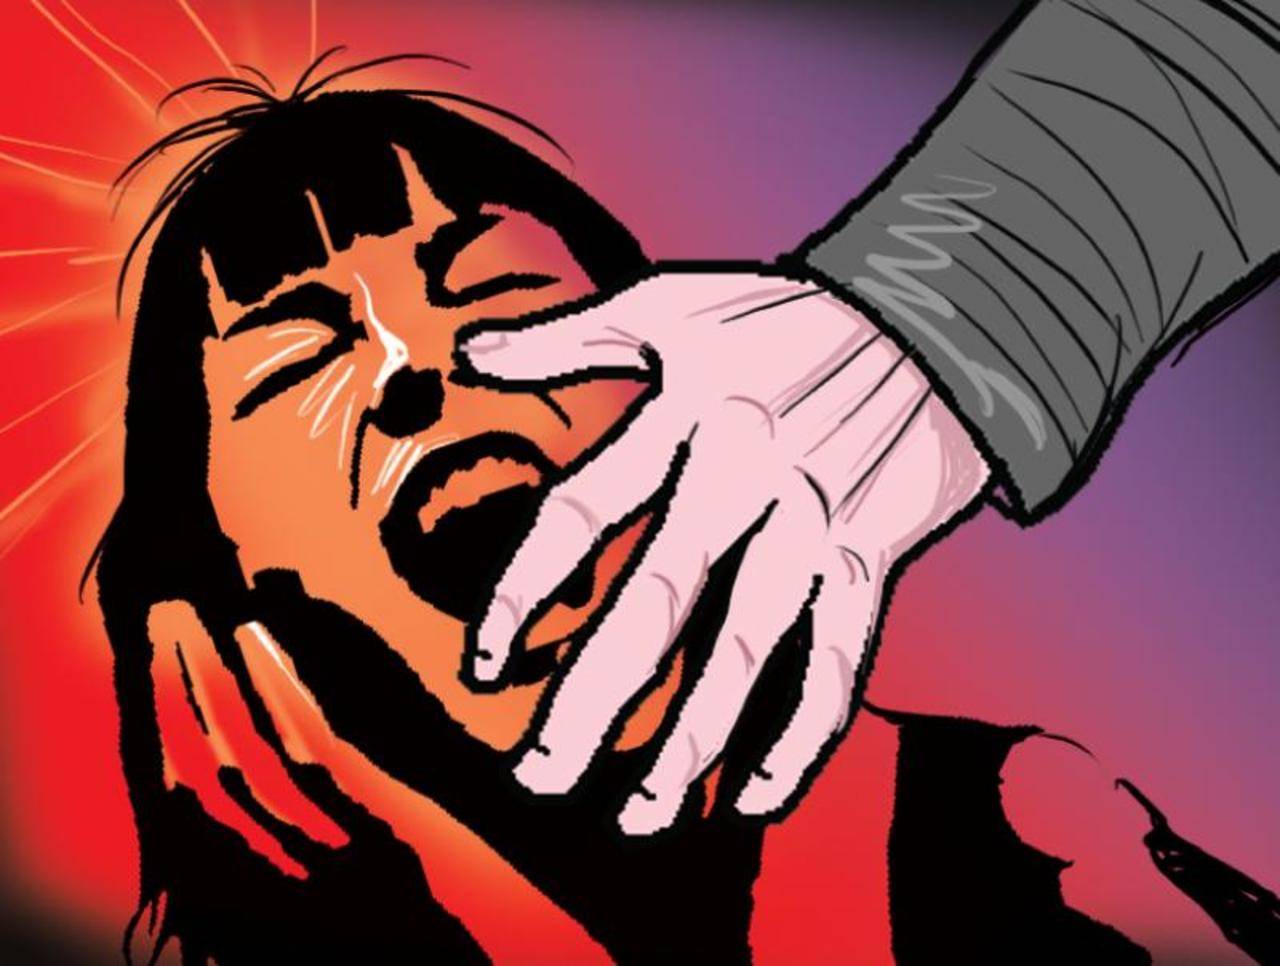 Doc booked for forcing wife to have unnatural sex Nagpur News photo pic